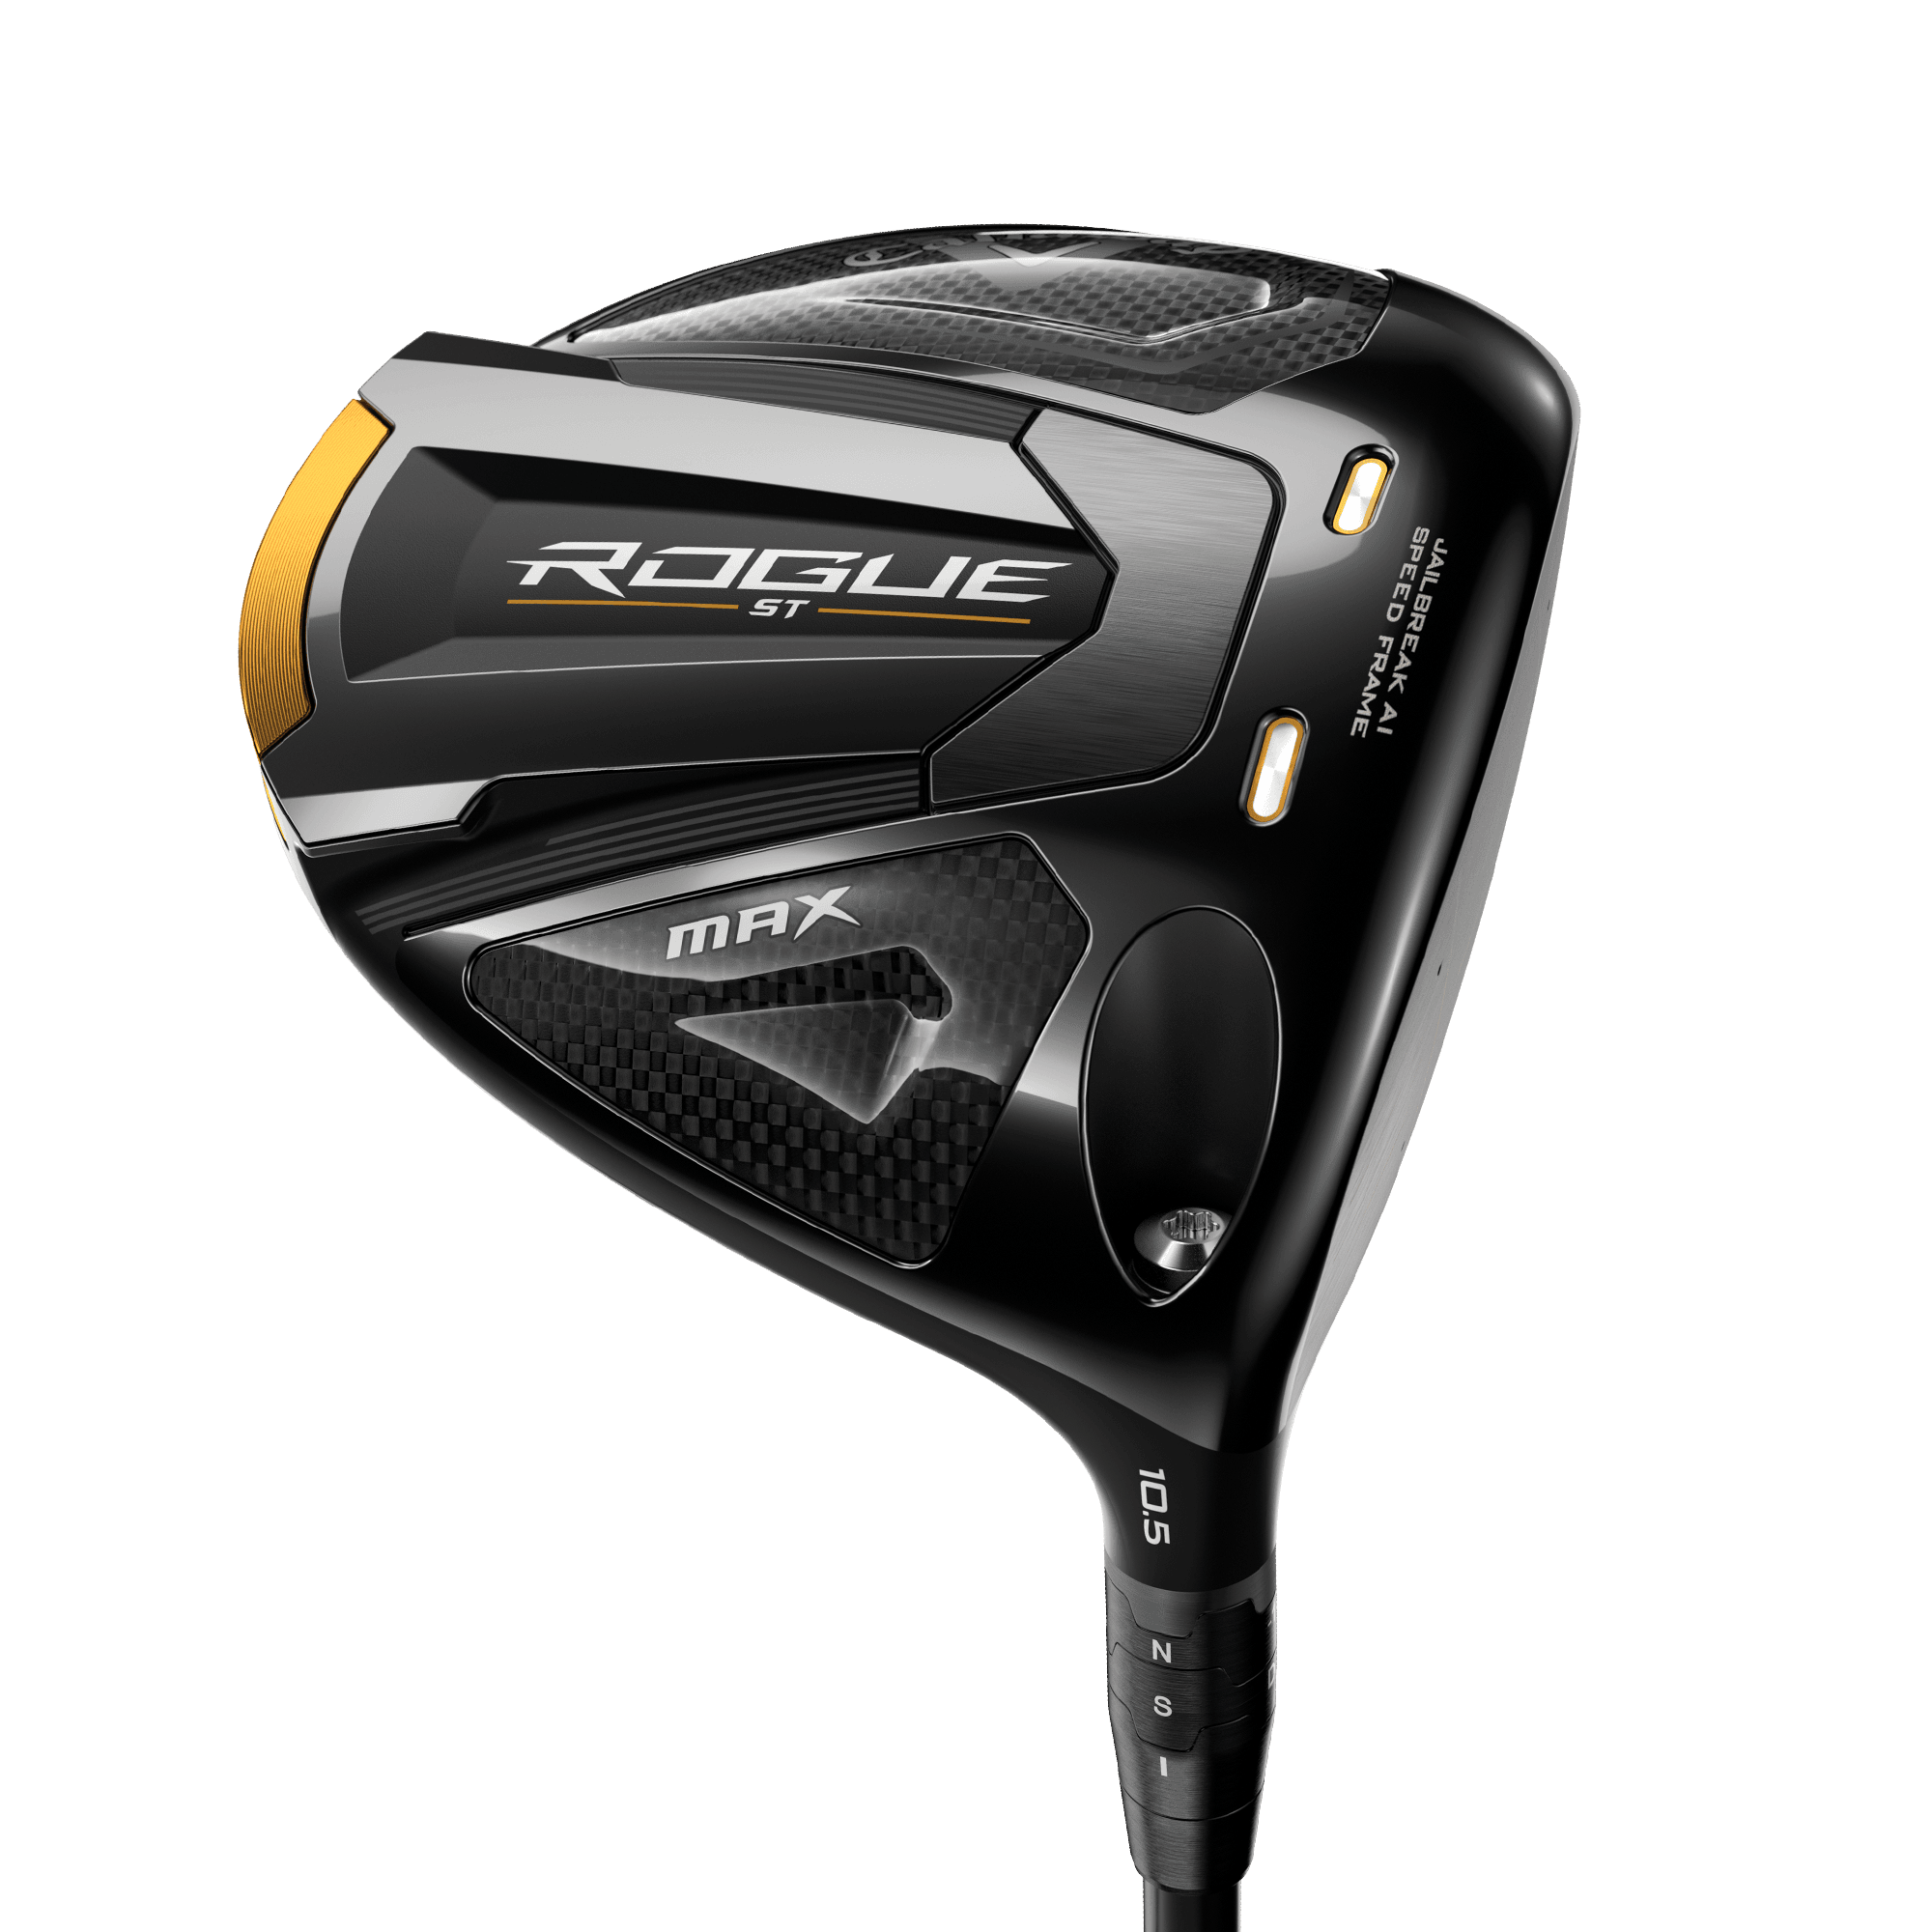 Rogue ST MAX Drivers | Callaway Golf Pre-Owned | yhv5588976 